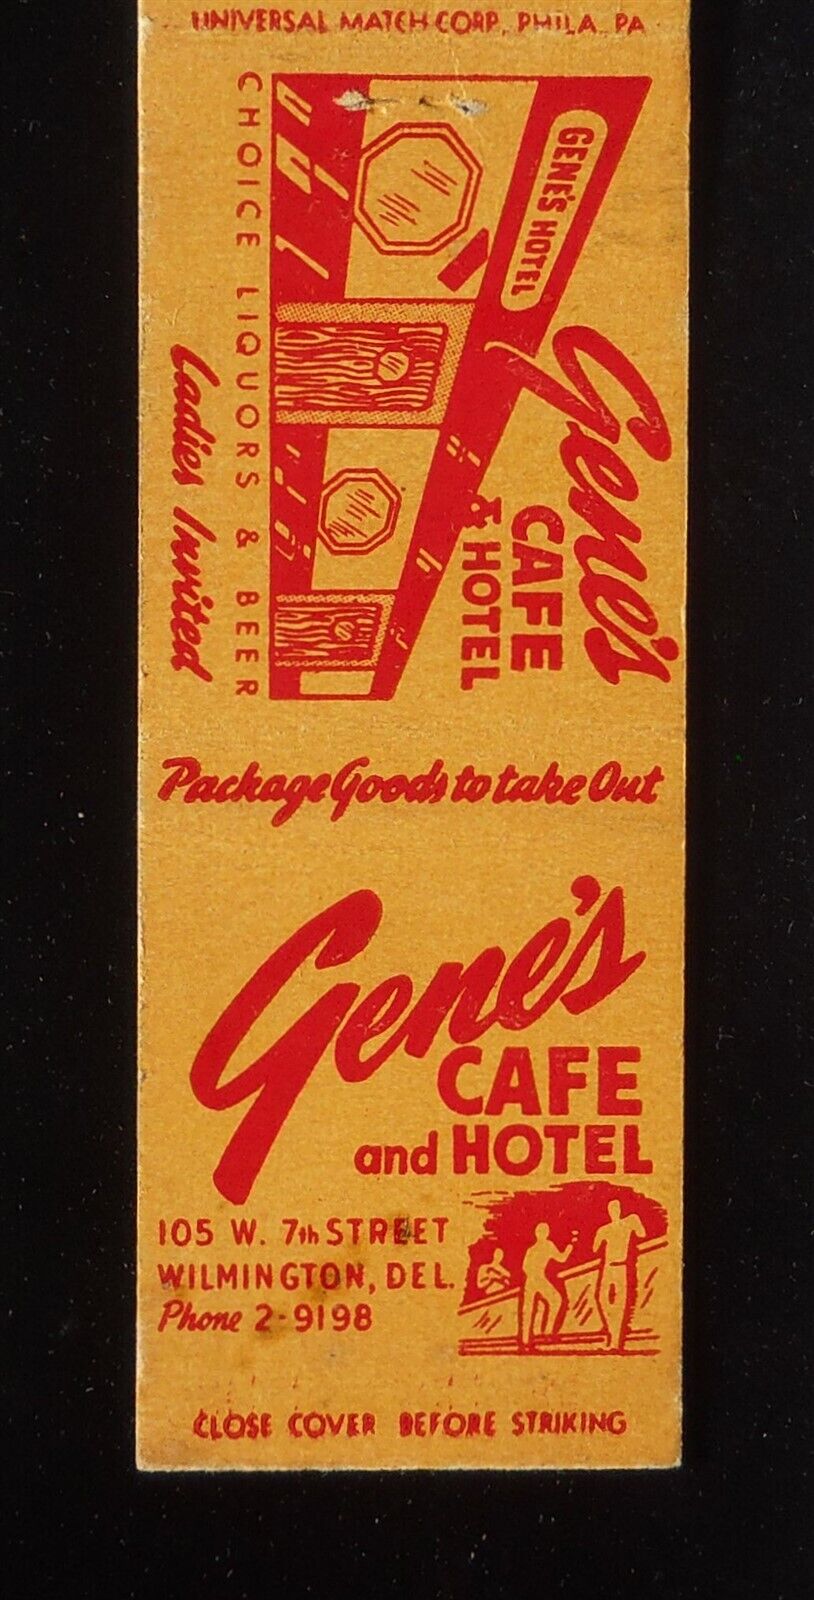 1940s Gene's Cafe and Hotel Ladies Invited Package Goods Take Out Wilmington DE